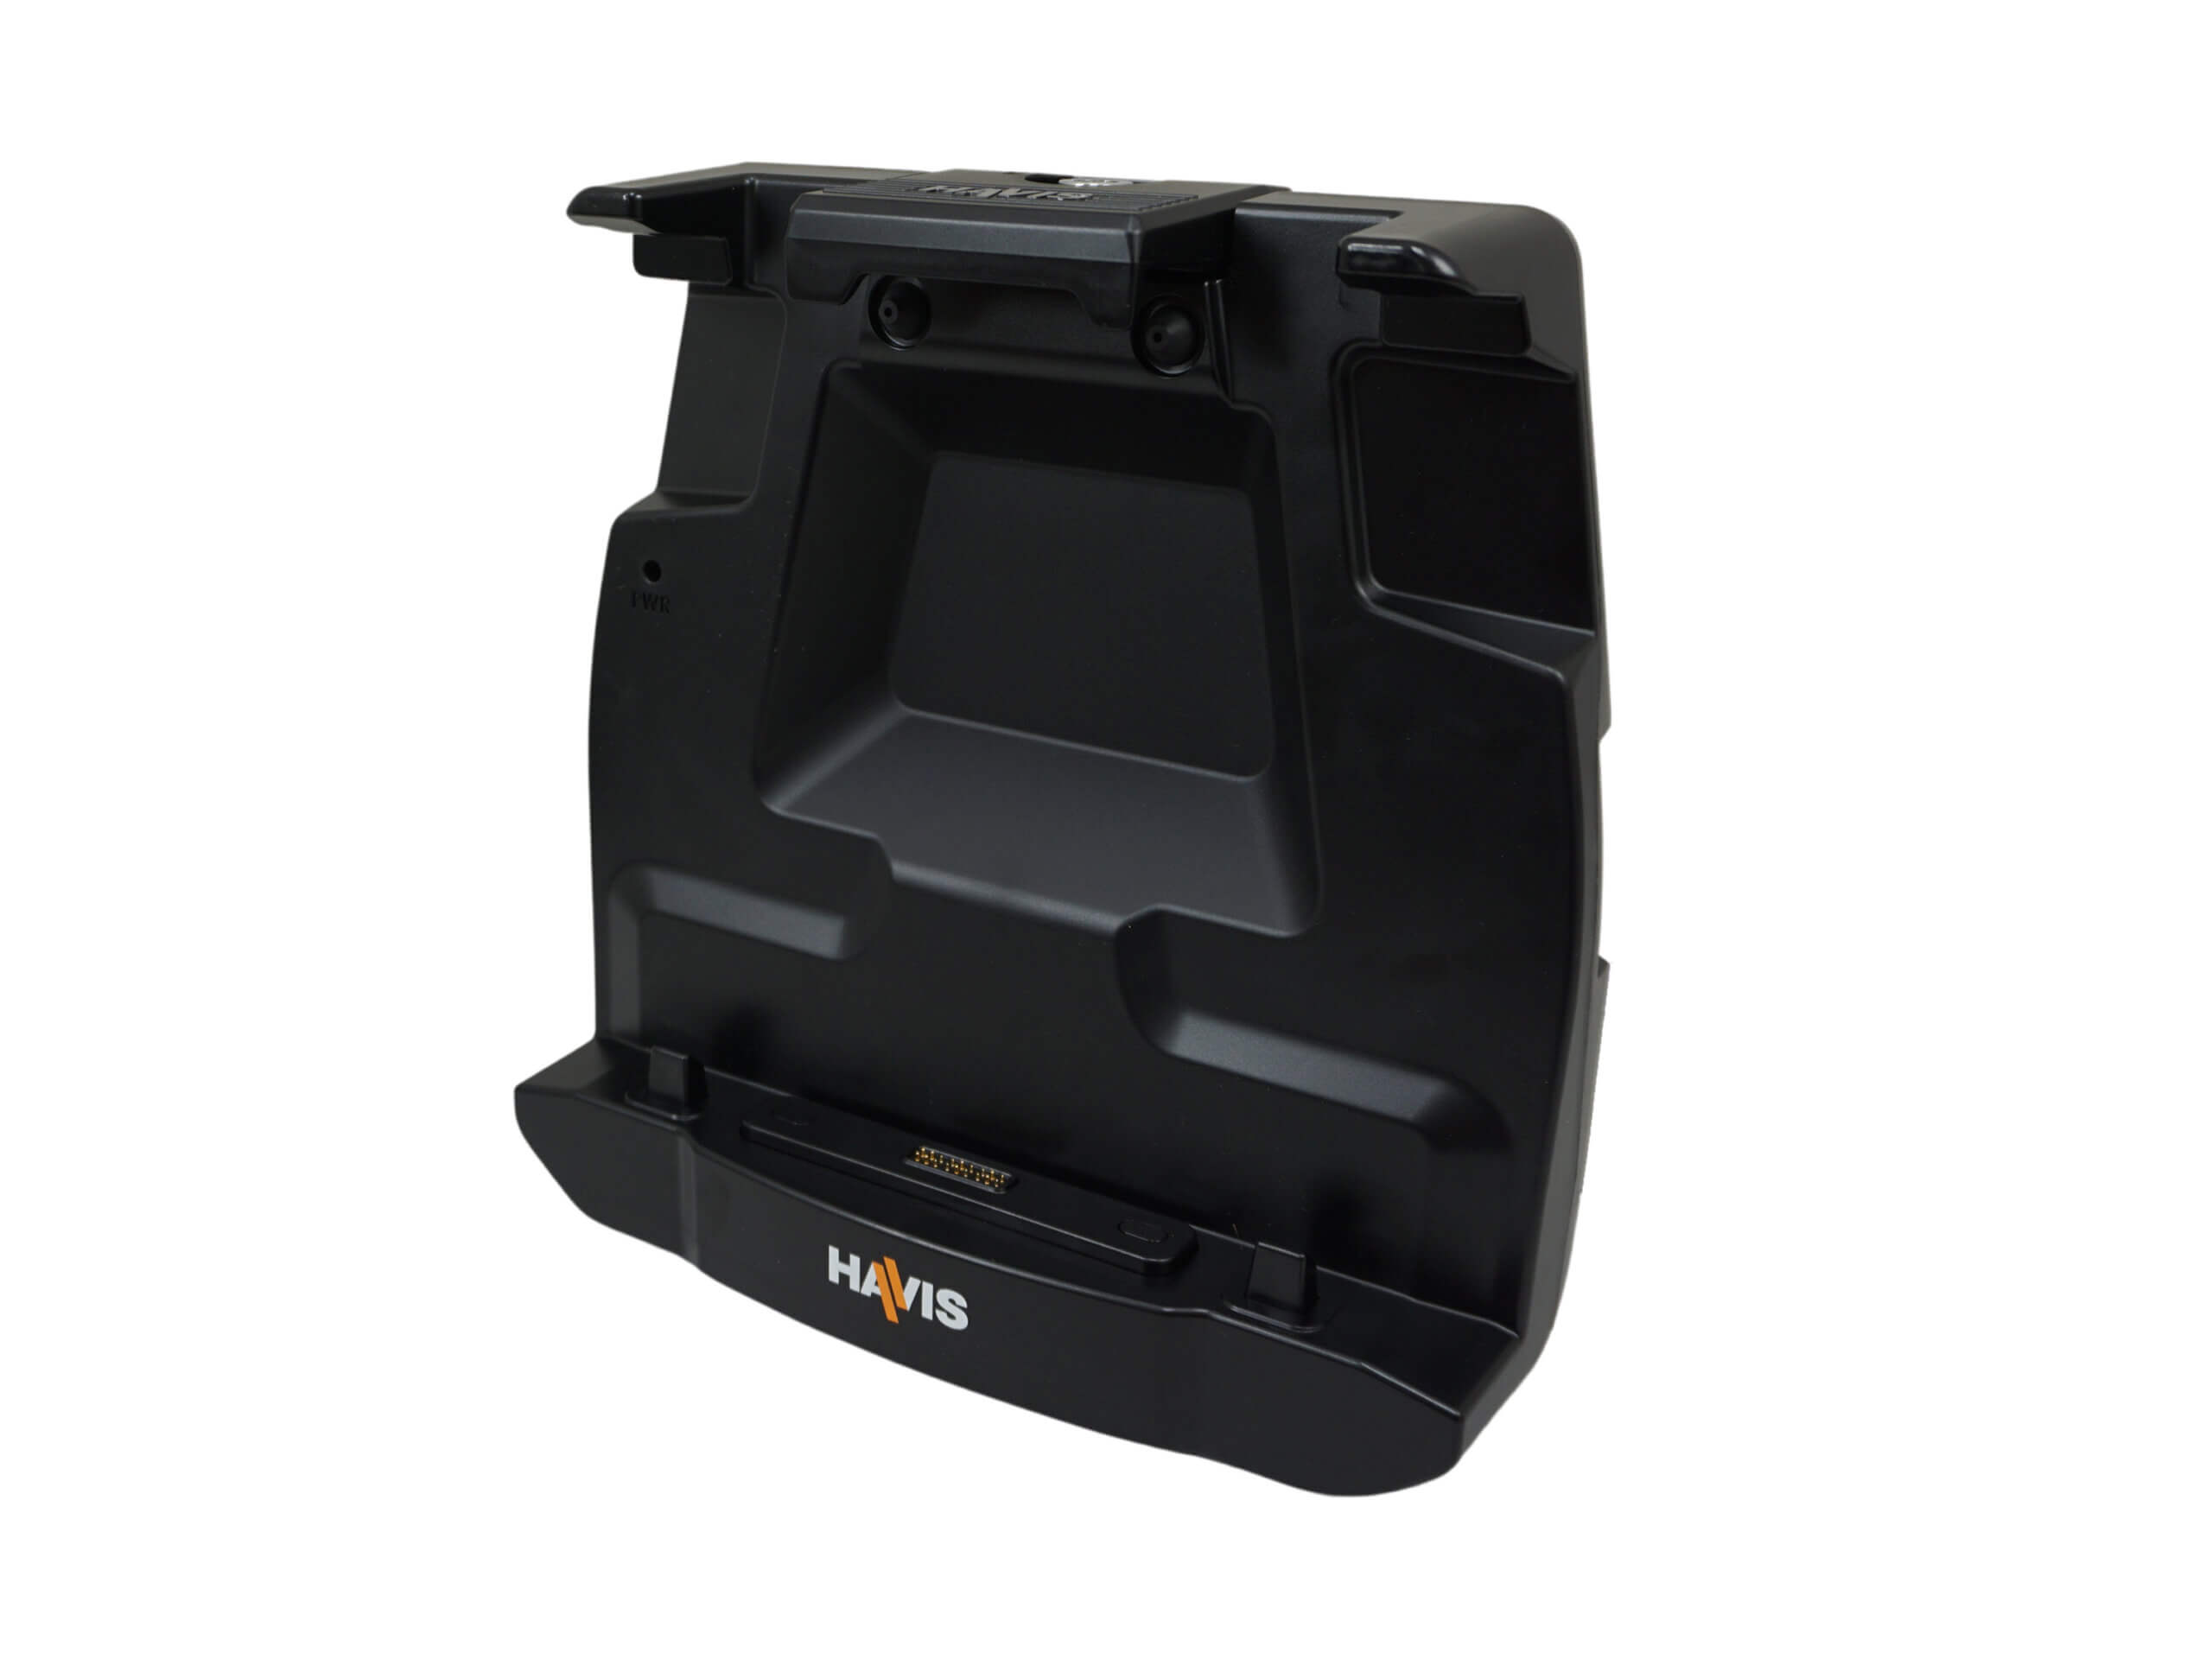 Docking Station for Dell’s 7230 Tablet with Advanced Port Replication and Internal, Non-isolated Power Supply